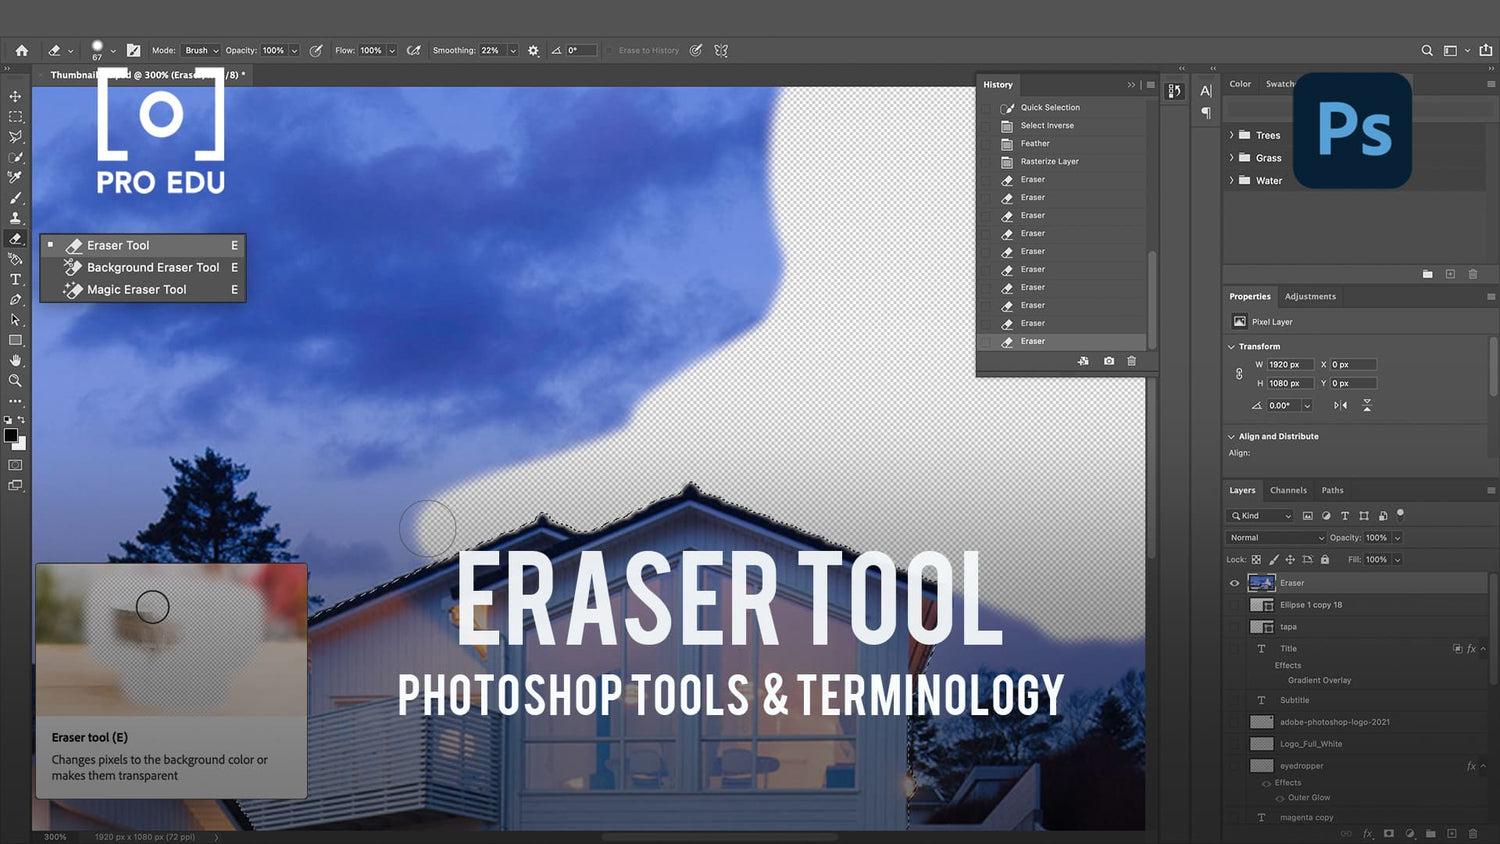 Eraser Tool Functions in Photoshop - PRO EDU Guide